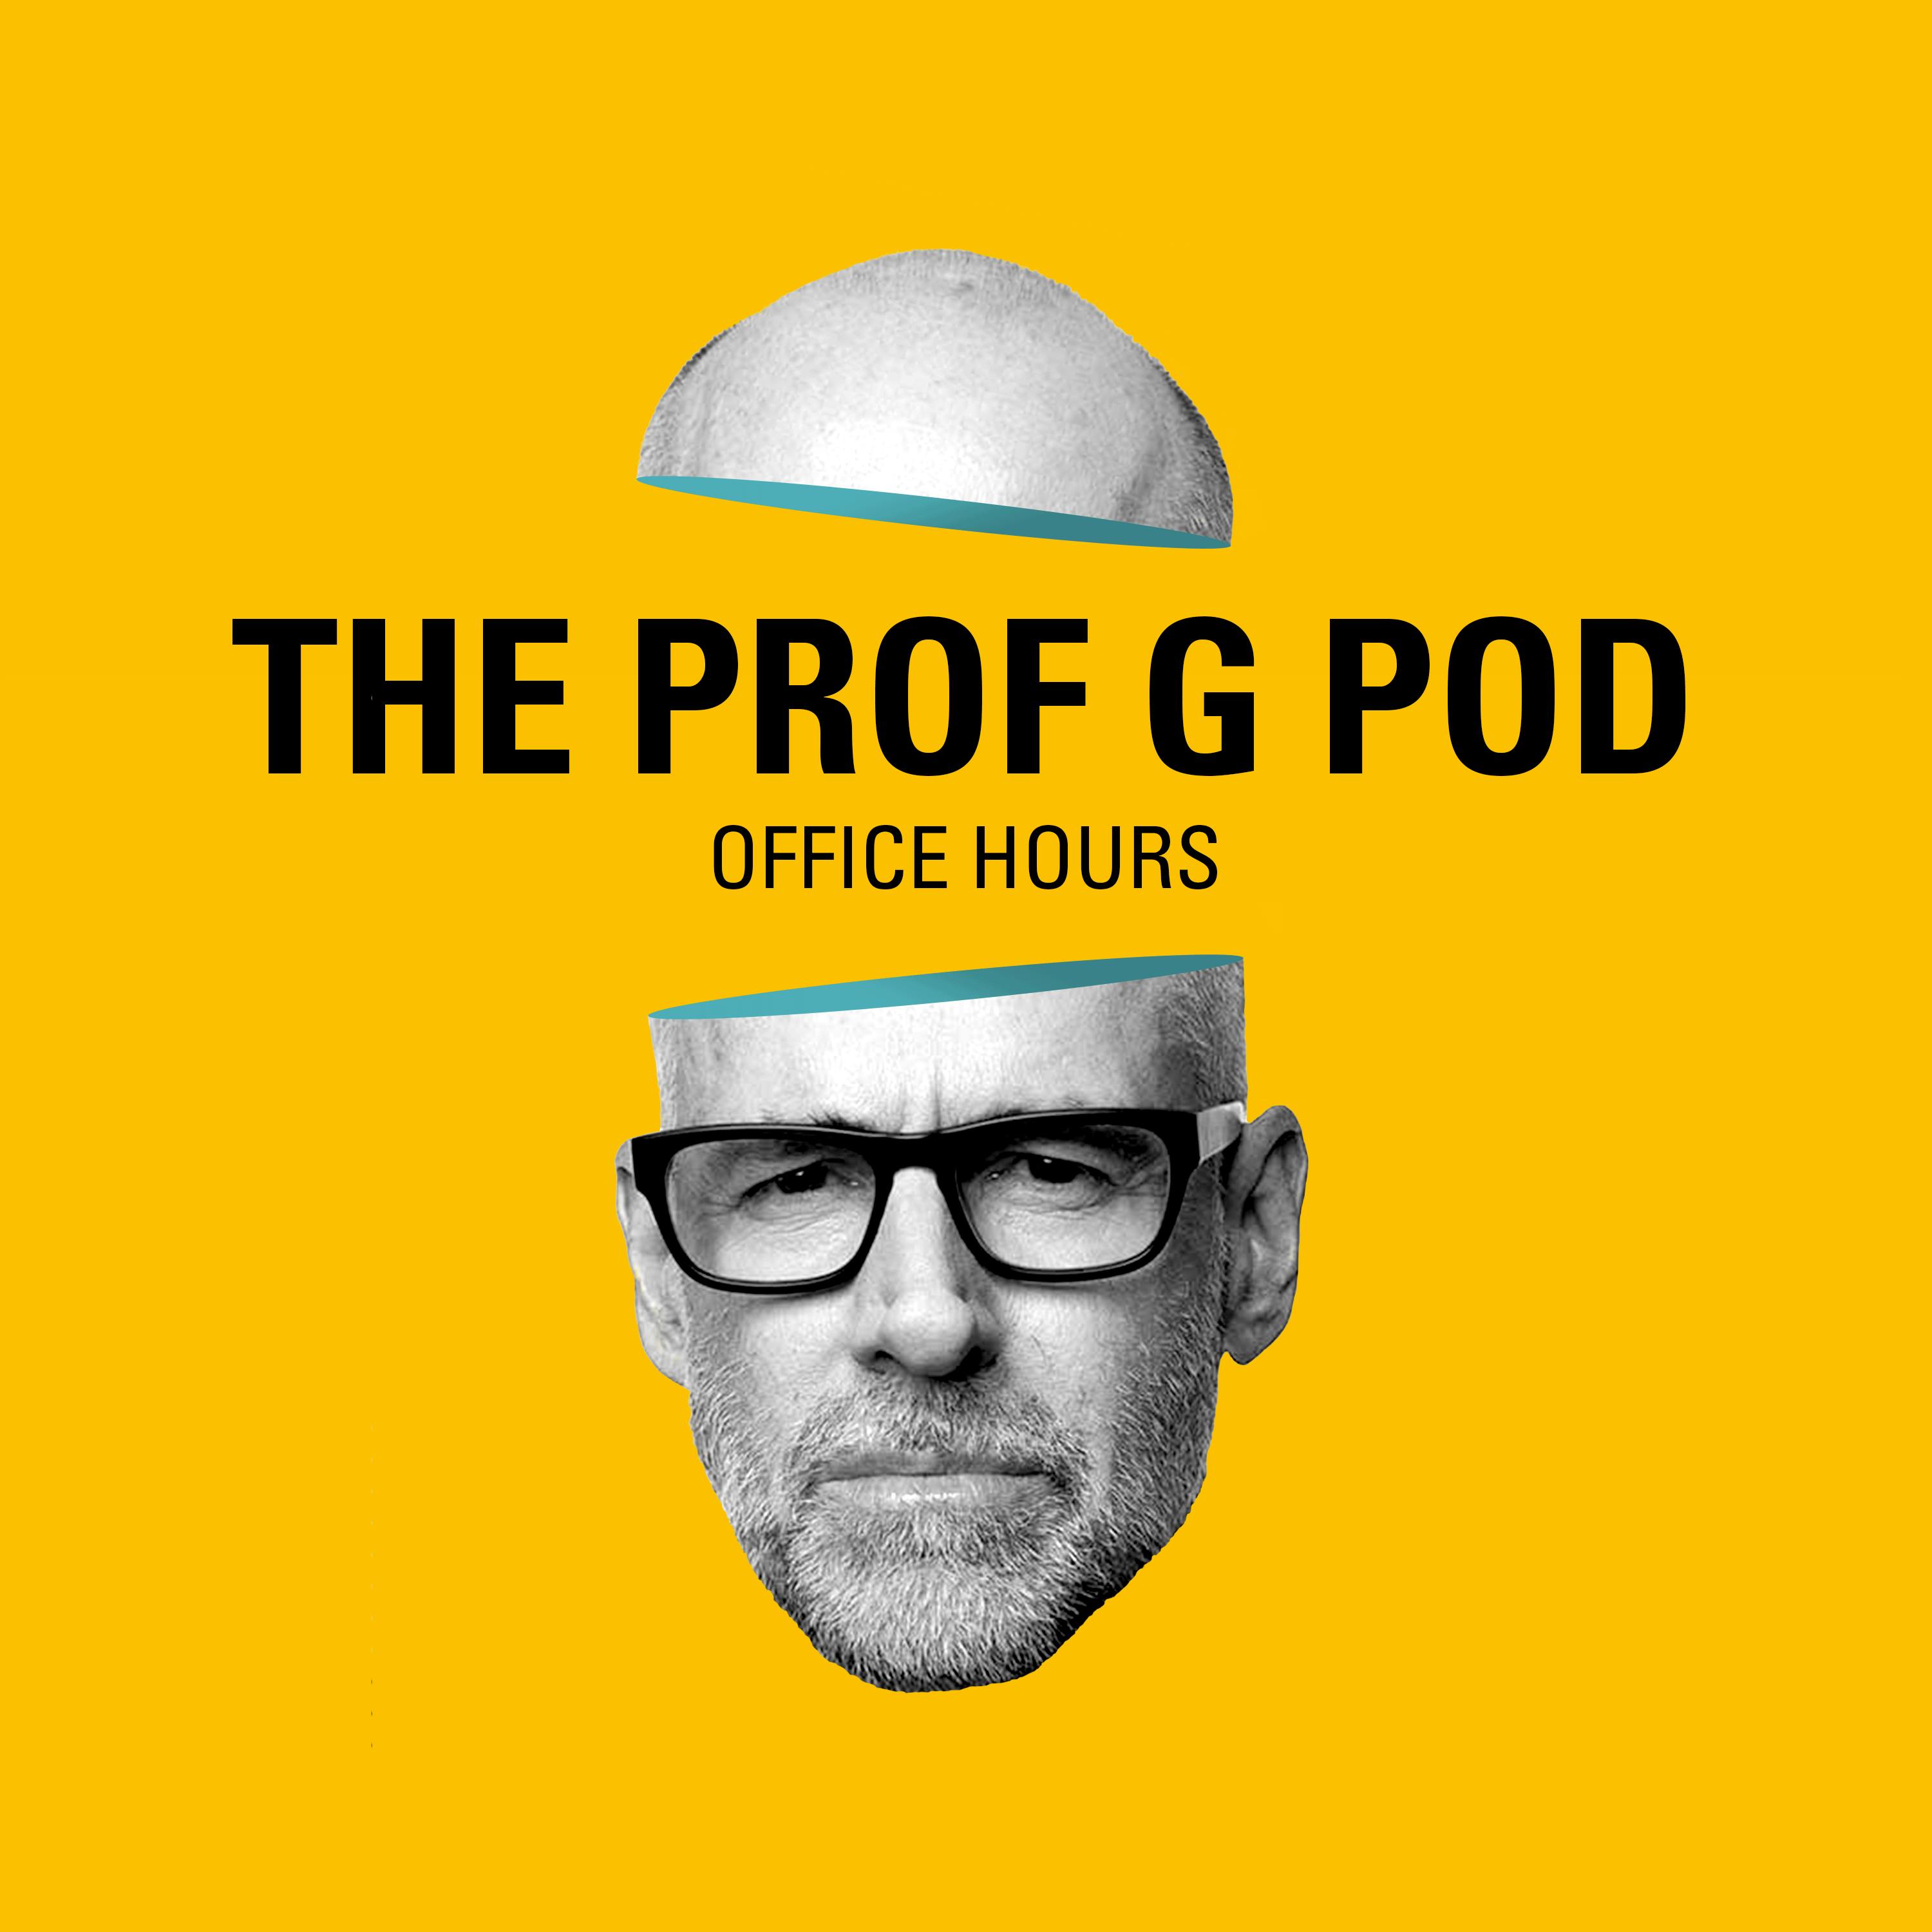 Office Hours: When to Sell Investments, Should I Take Venture Capital Money?, and Scott’s Book-Writing Career & Advice by Vox Media Podcast Network